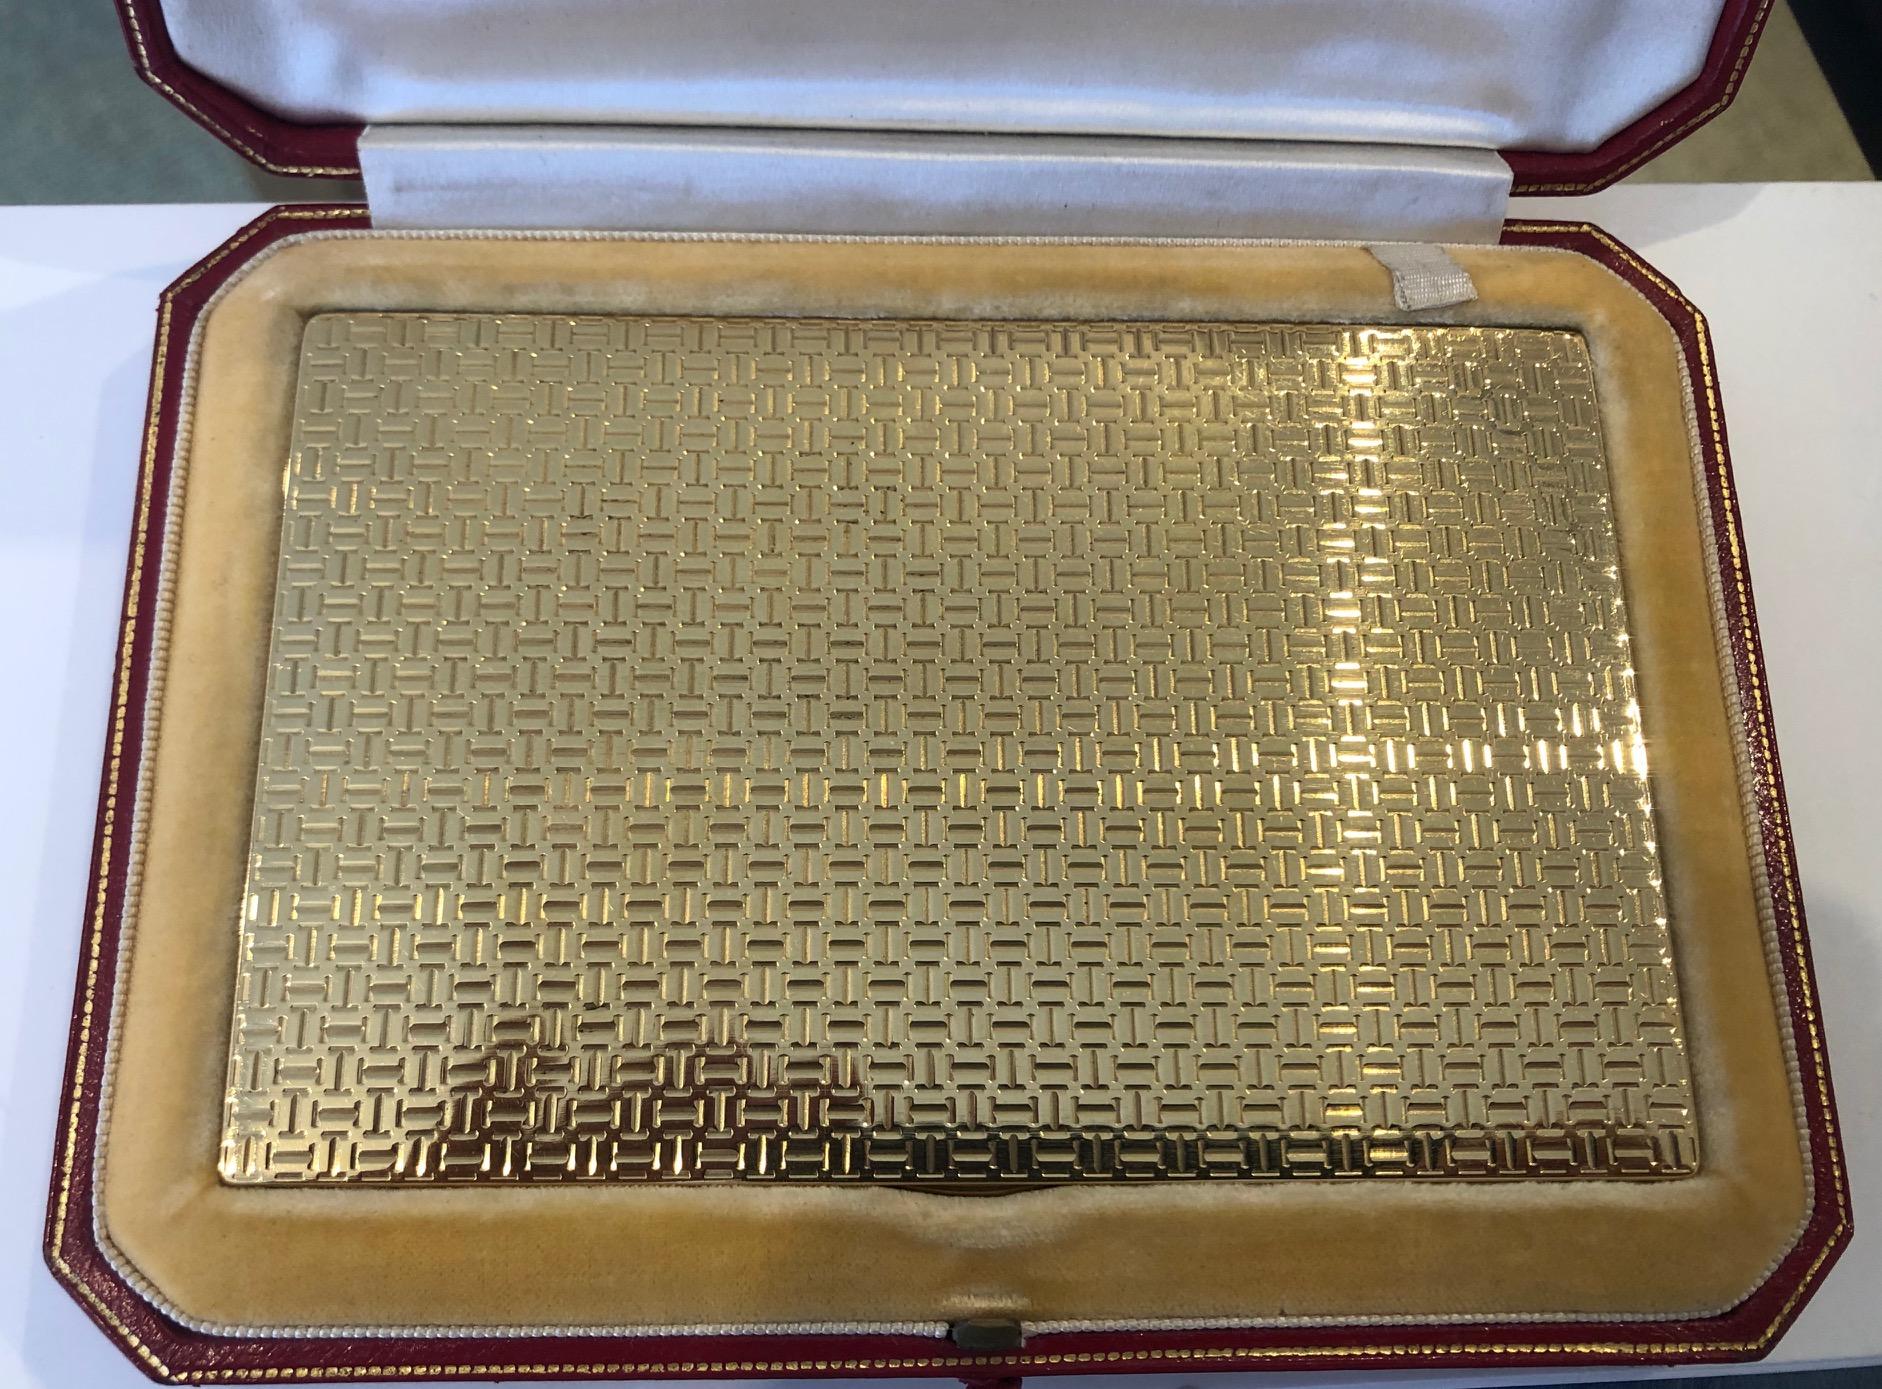 18 Carat Cartier Gold Case with Sapphire Clasp in Original Fitted Box
A Cartier gold case with sapphire clasp in original leather tooled fitted box. This beautifully crafted case weighs approximately 230 grams. It is fully hallmarked and stamped JC